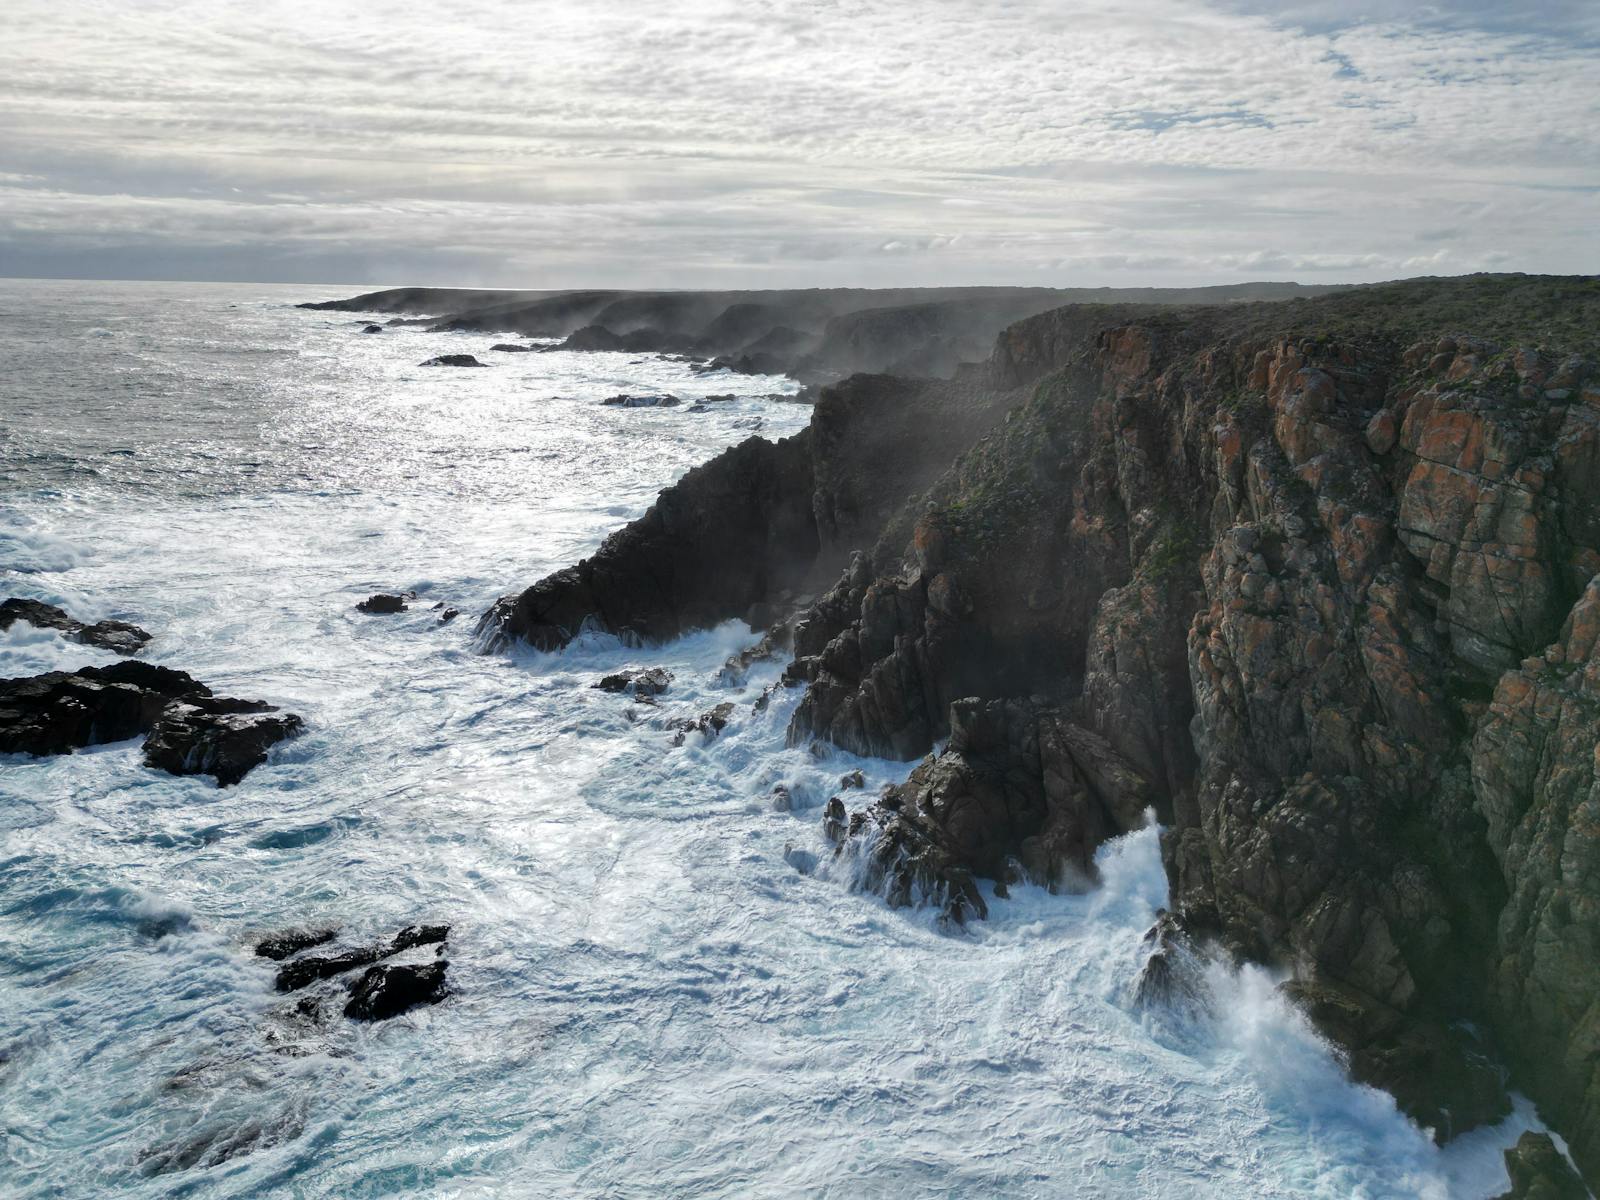 View of the cliffs at Seal Rocks on King Island, looking south